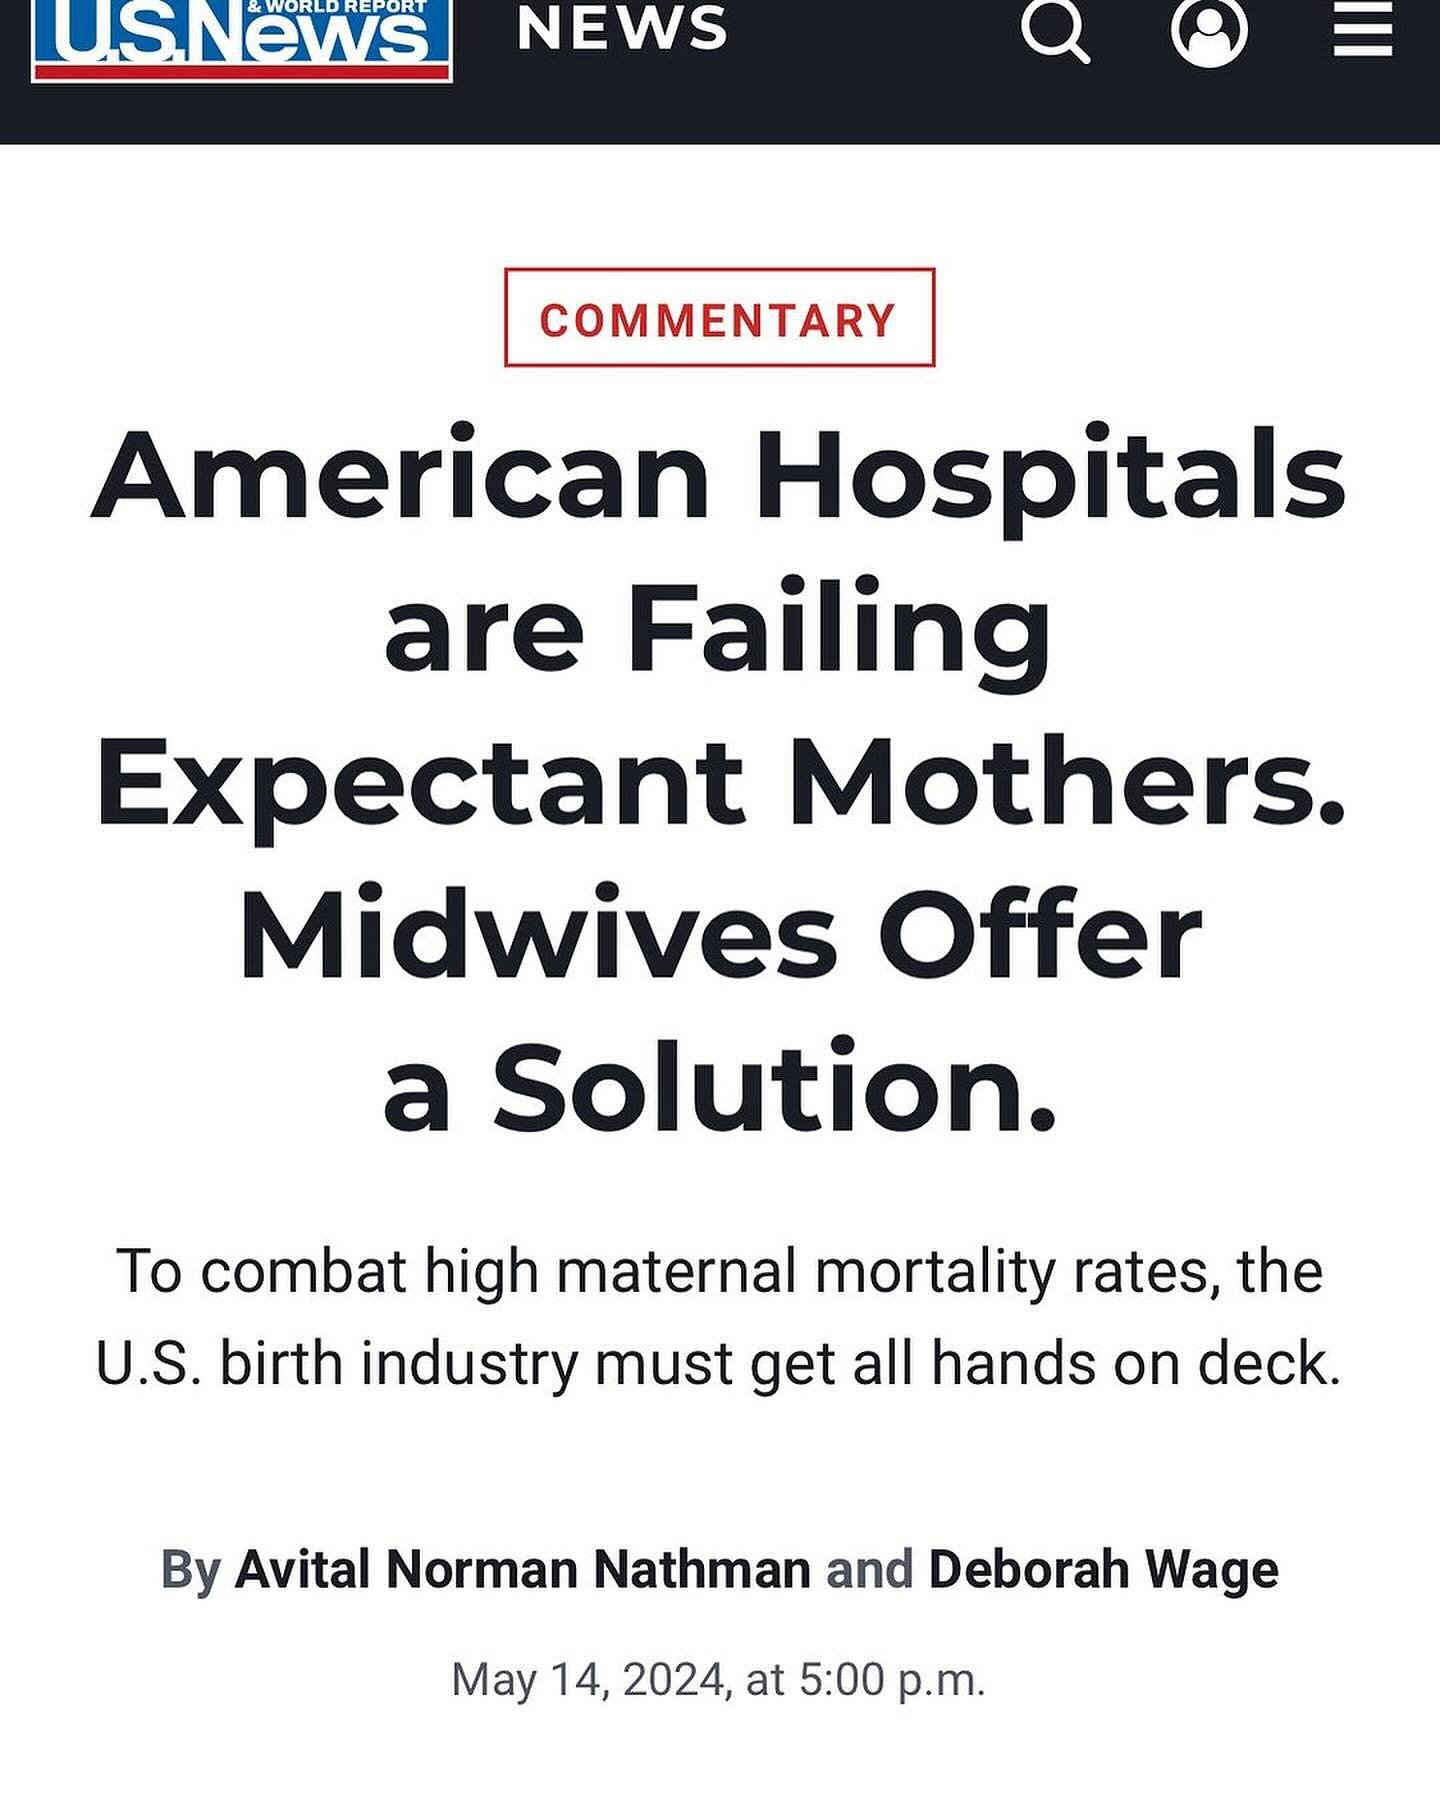 Repost from @speakingofbirth
&bull;
https://www.usnews.com/opinion/articles/2024-05-14/american-hospitals-are-failing-expectant-mothers-midwives-offer-a-solution